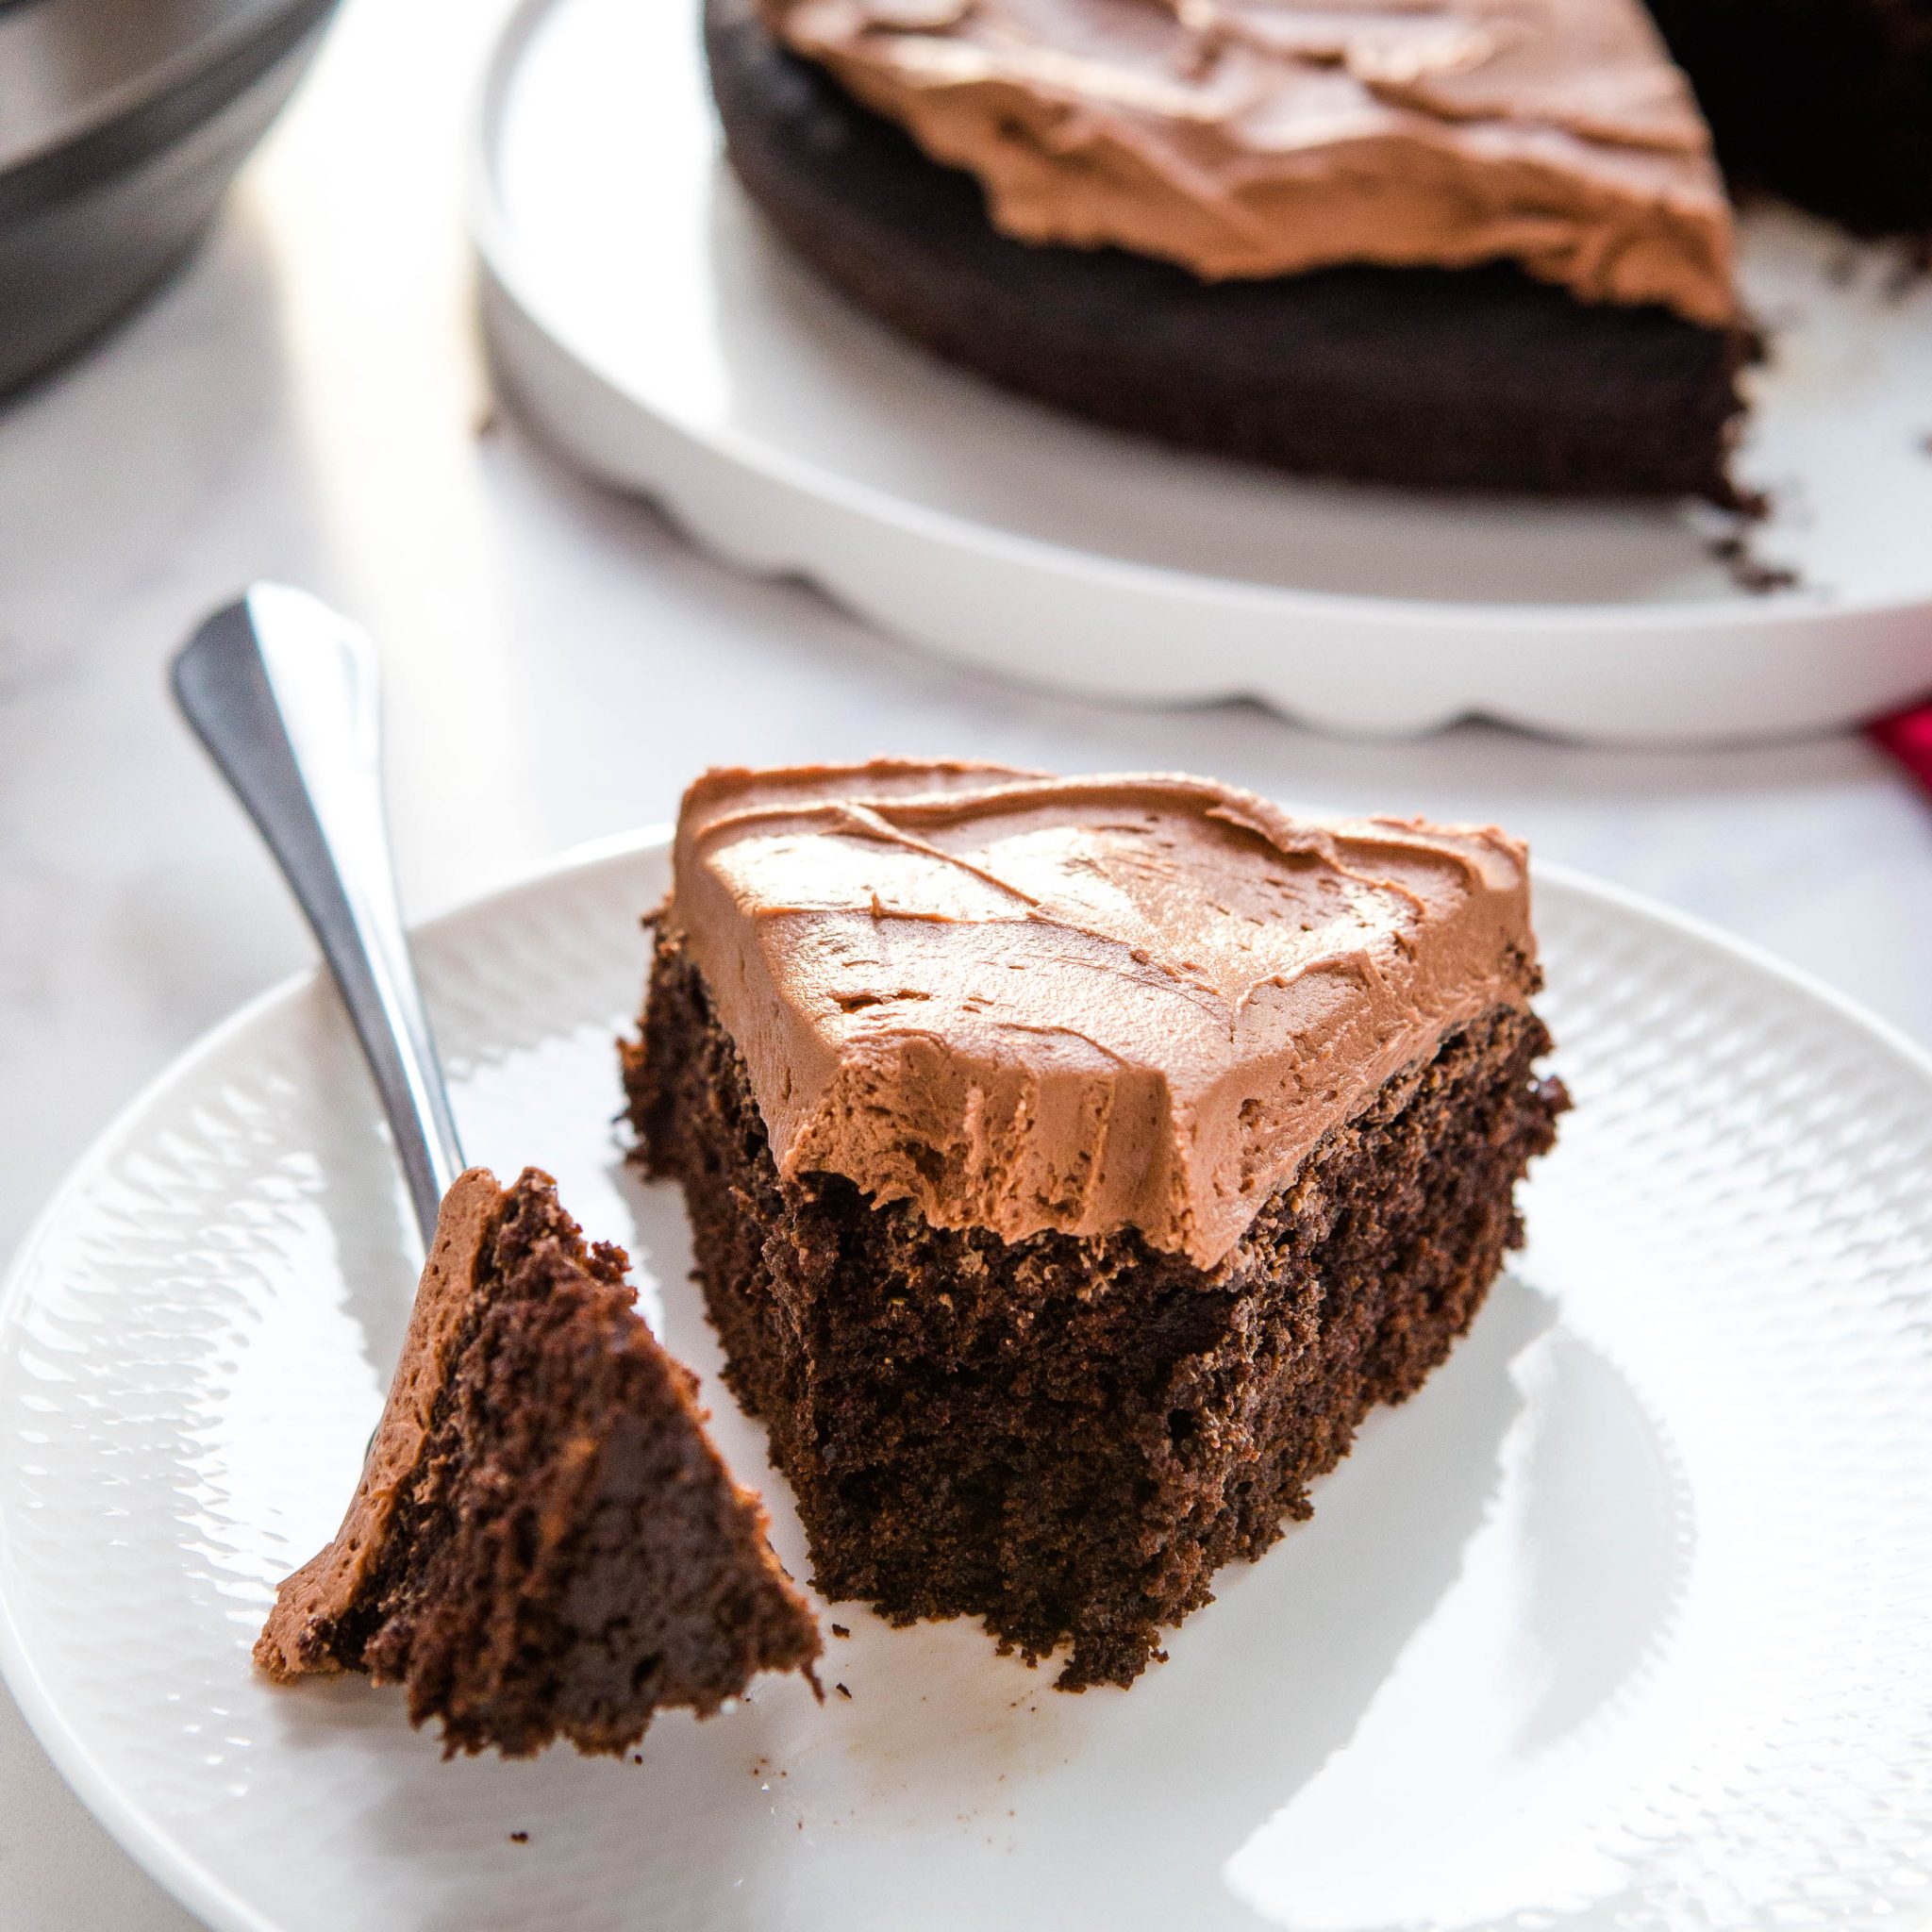 https://thebusybaker.ca/wp-content/uploads/2021/02/instant-pot-chocolate-cake-fb-ig-7-scaled.jpg